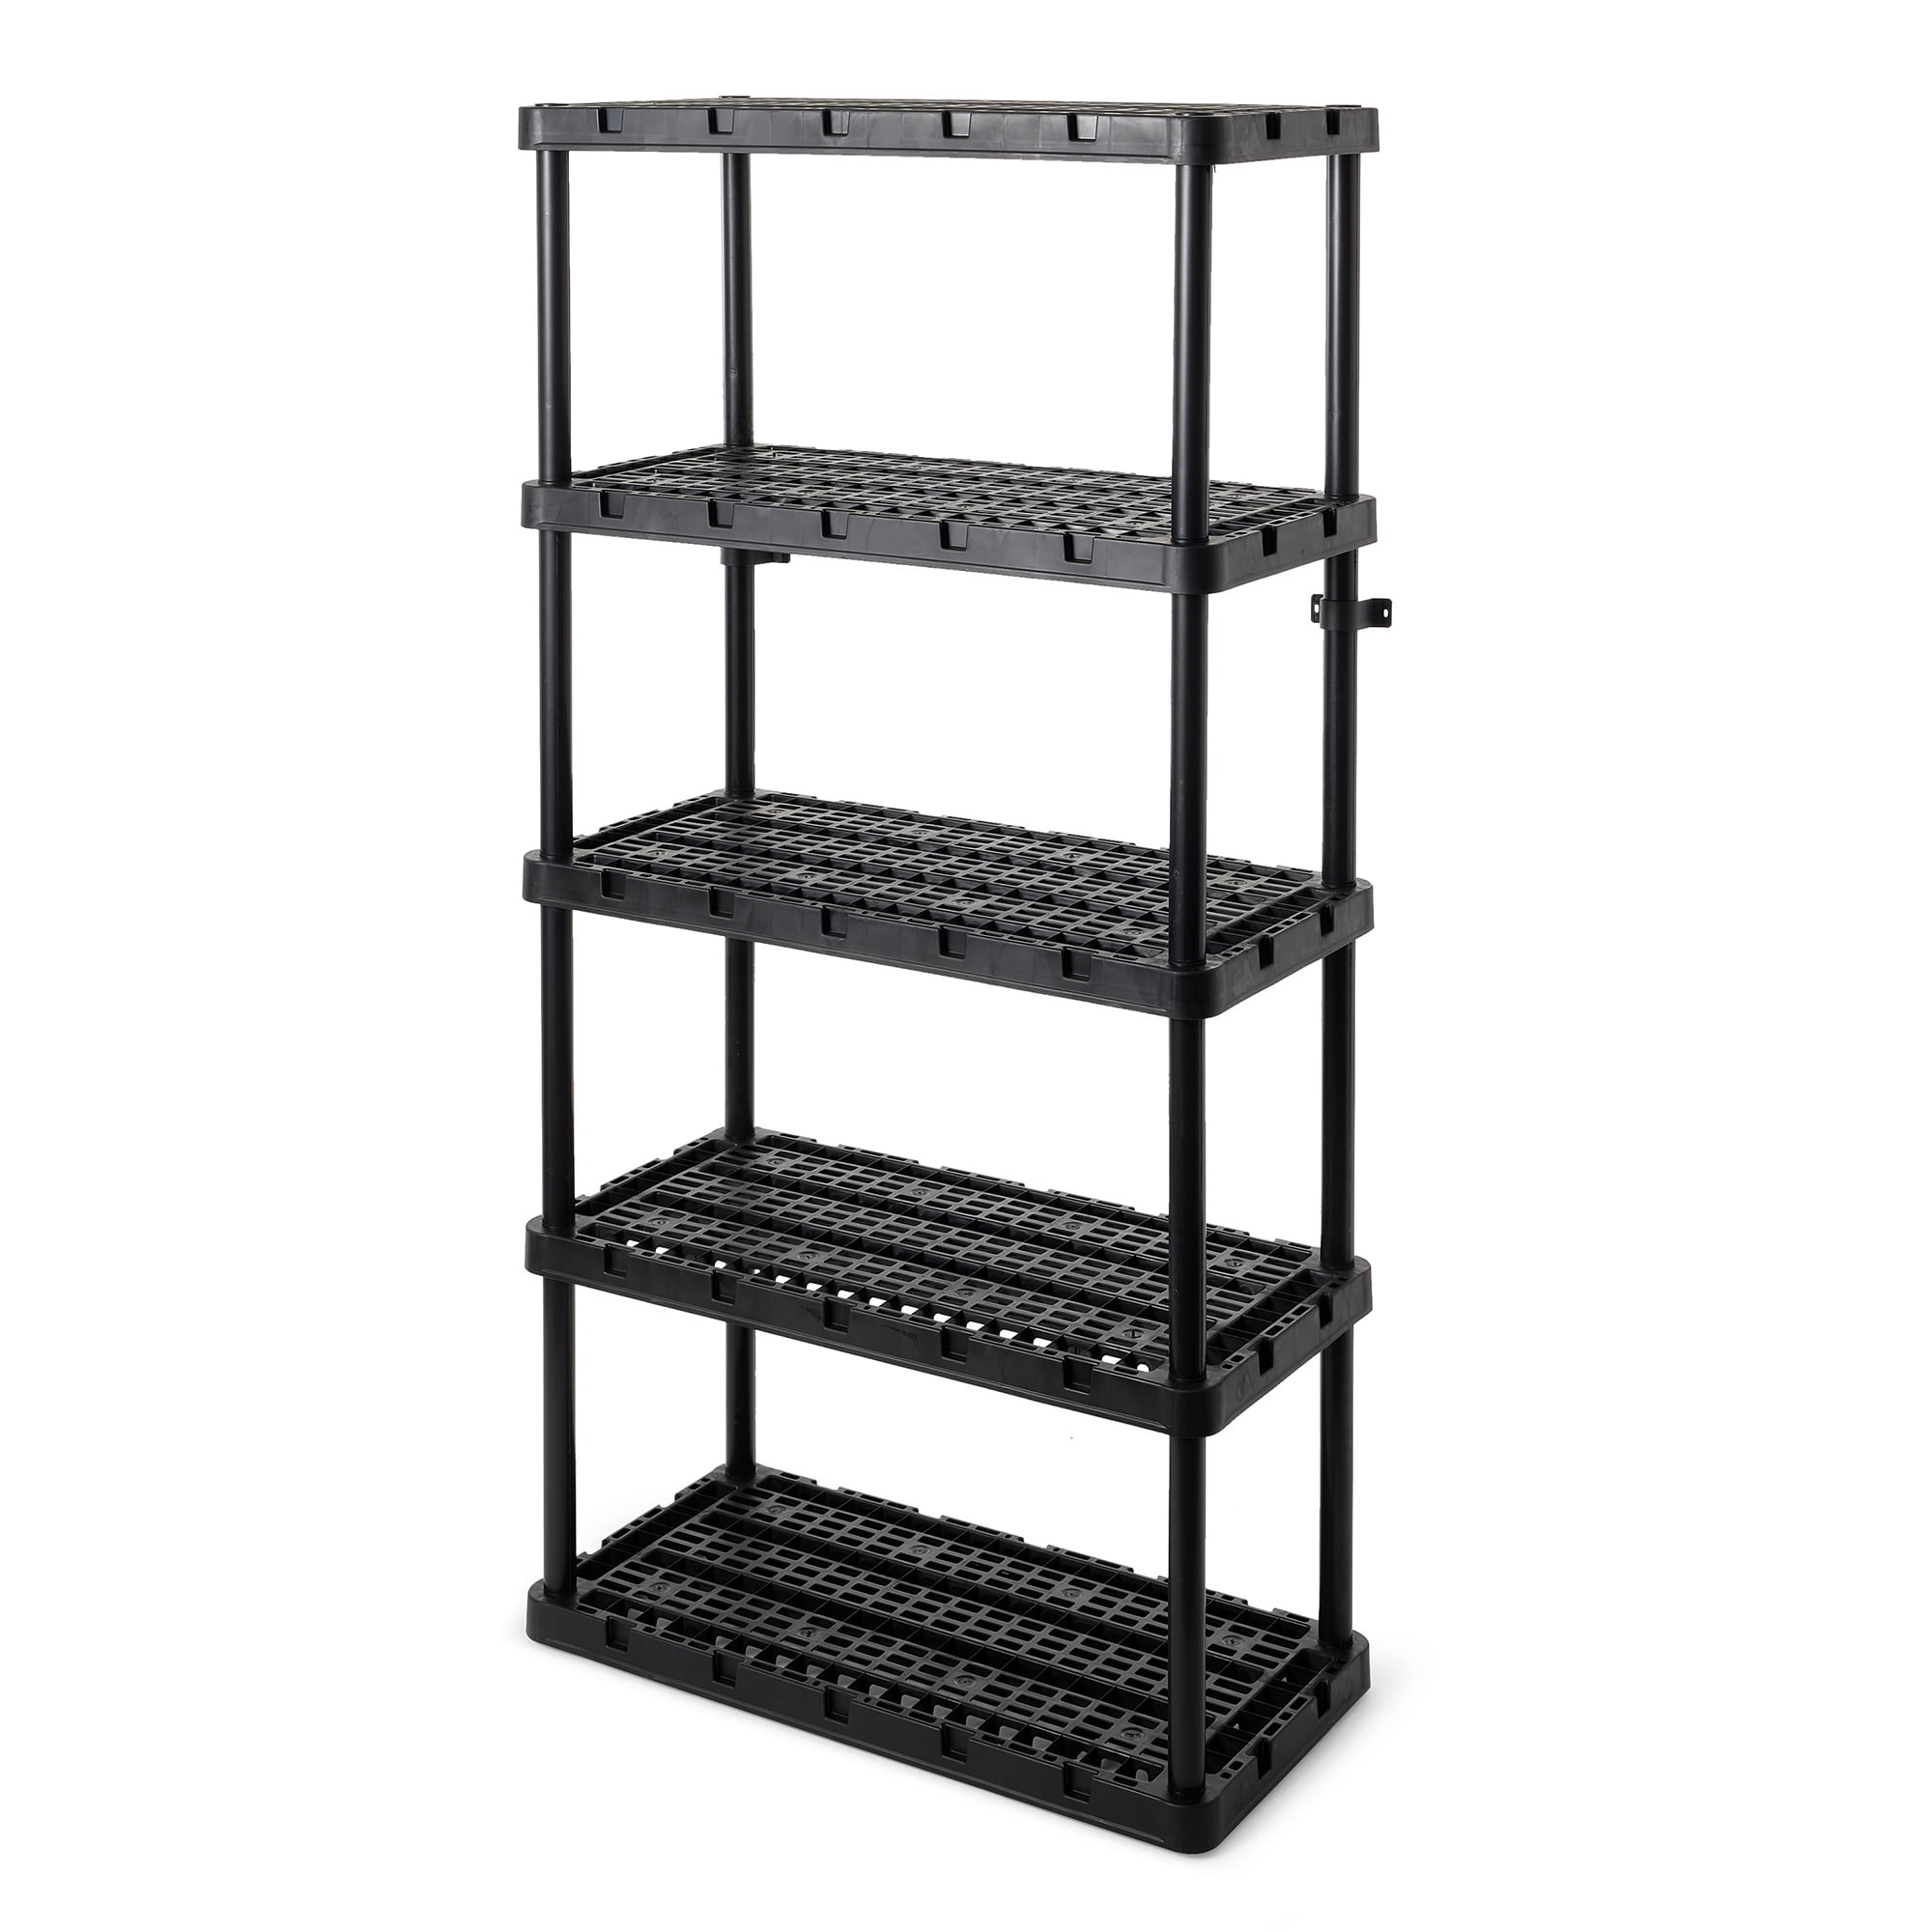 Picture of Feit Electric 5013641 72 x 36 x 18 in. Living Knect-A-Shelf D Resin Shelving Unit, Black